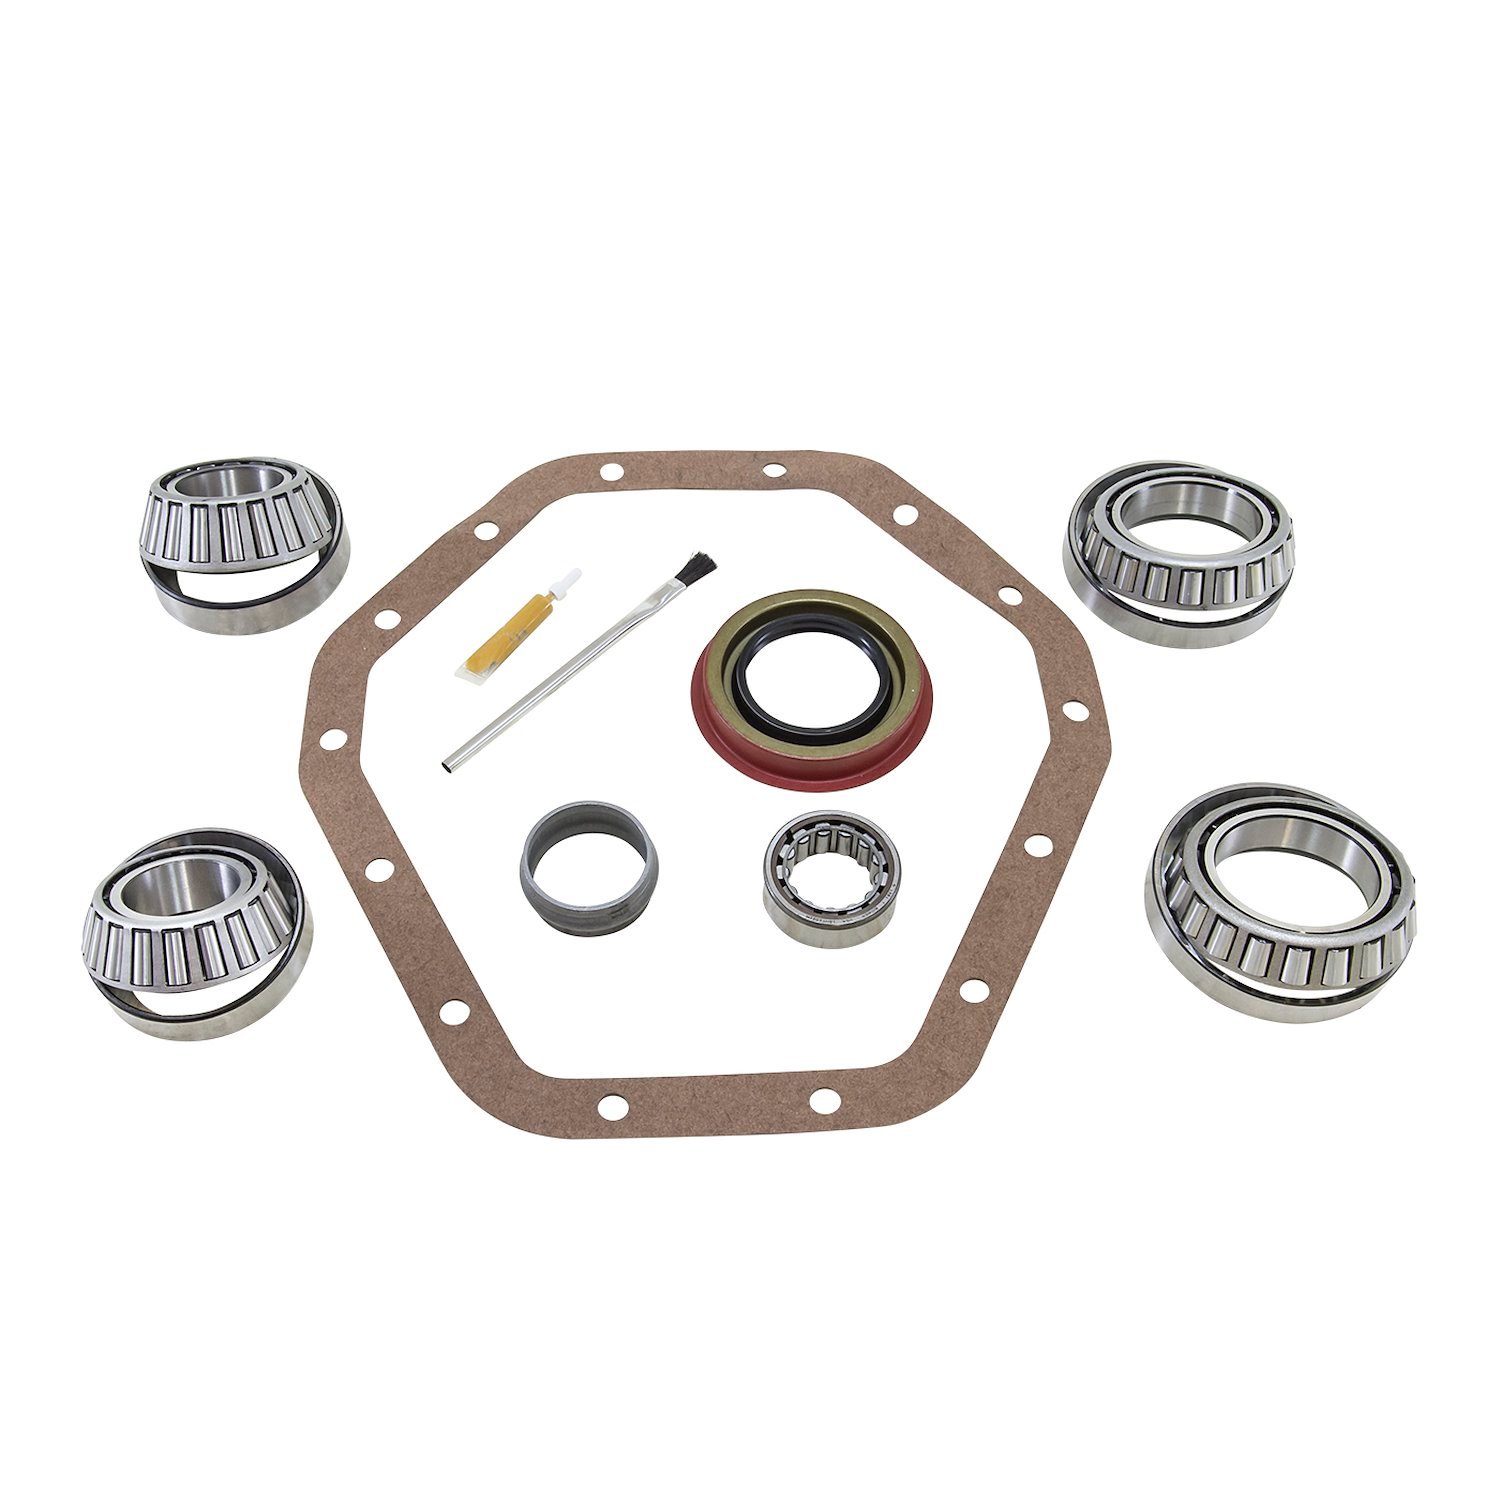 Bearing Installation Kit For 1988-Down GM 10.5" 14-Bolt Truck Differential